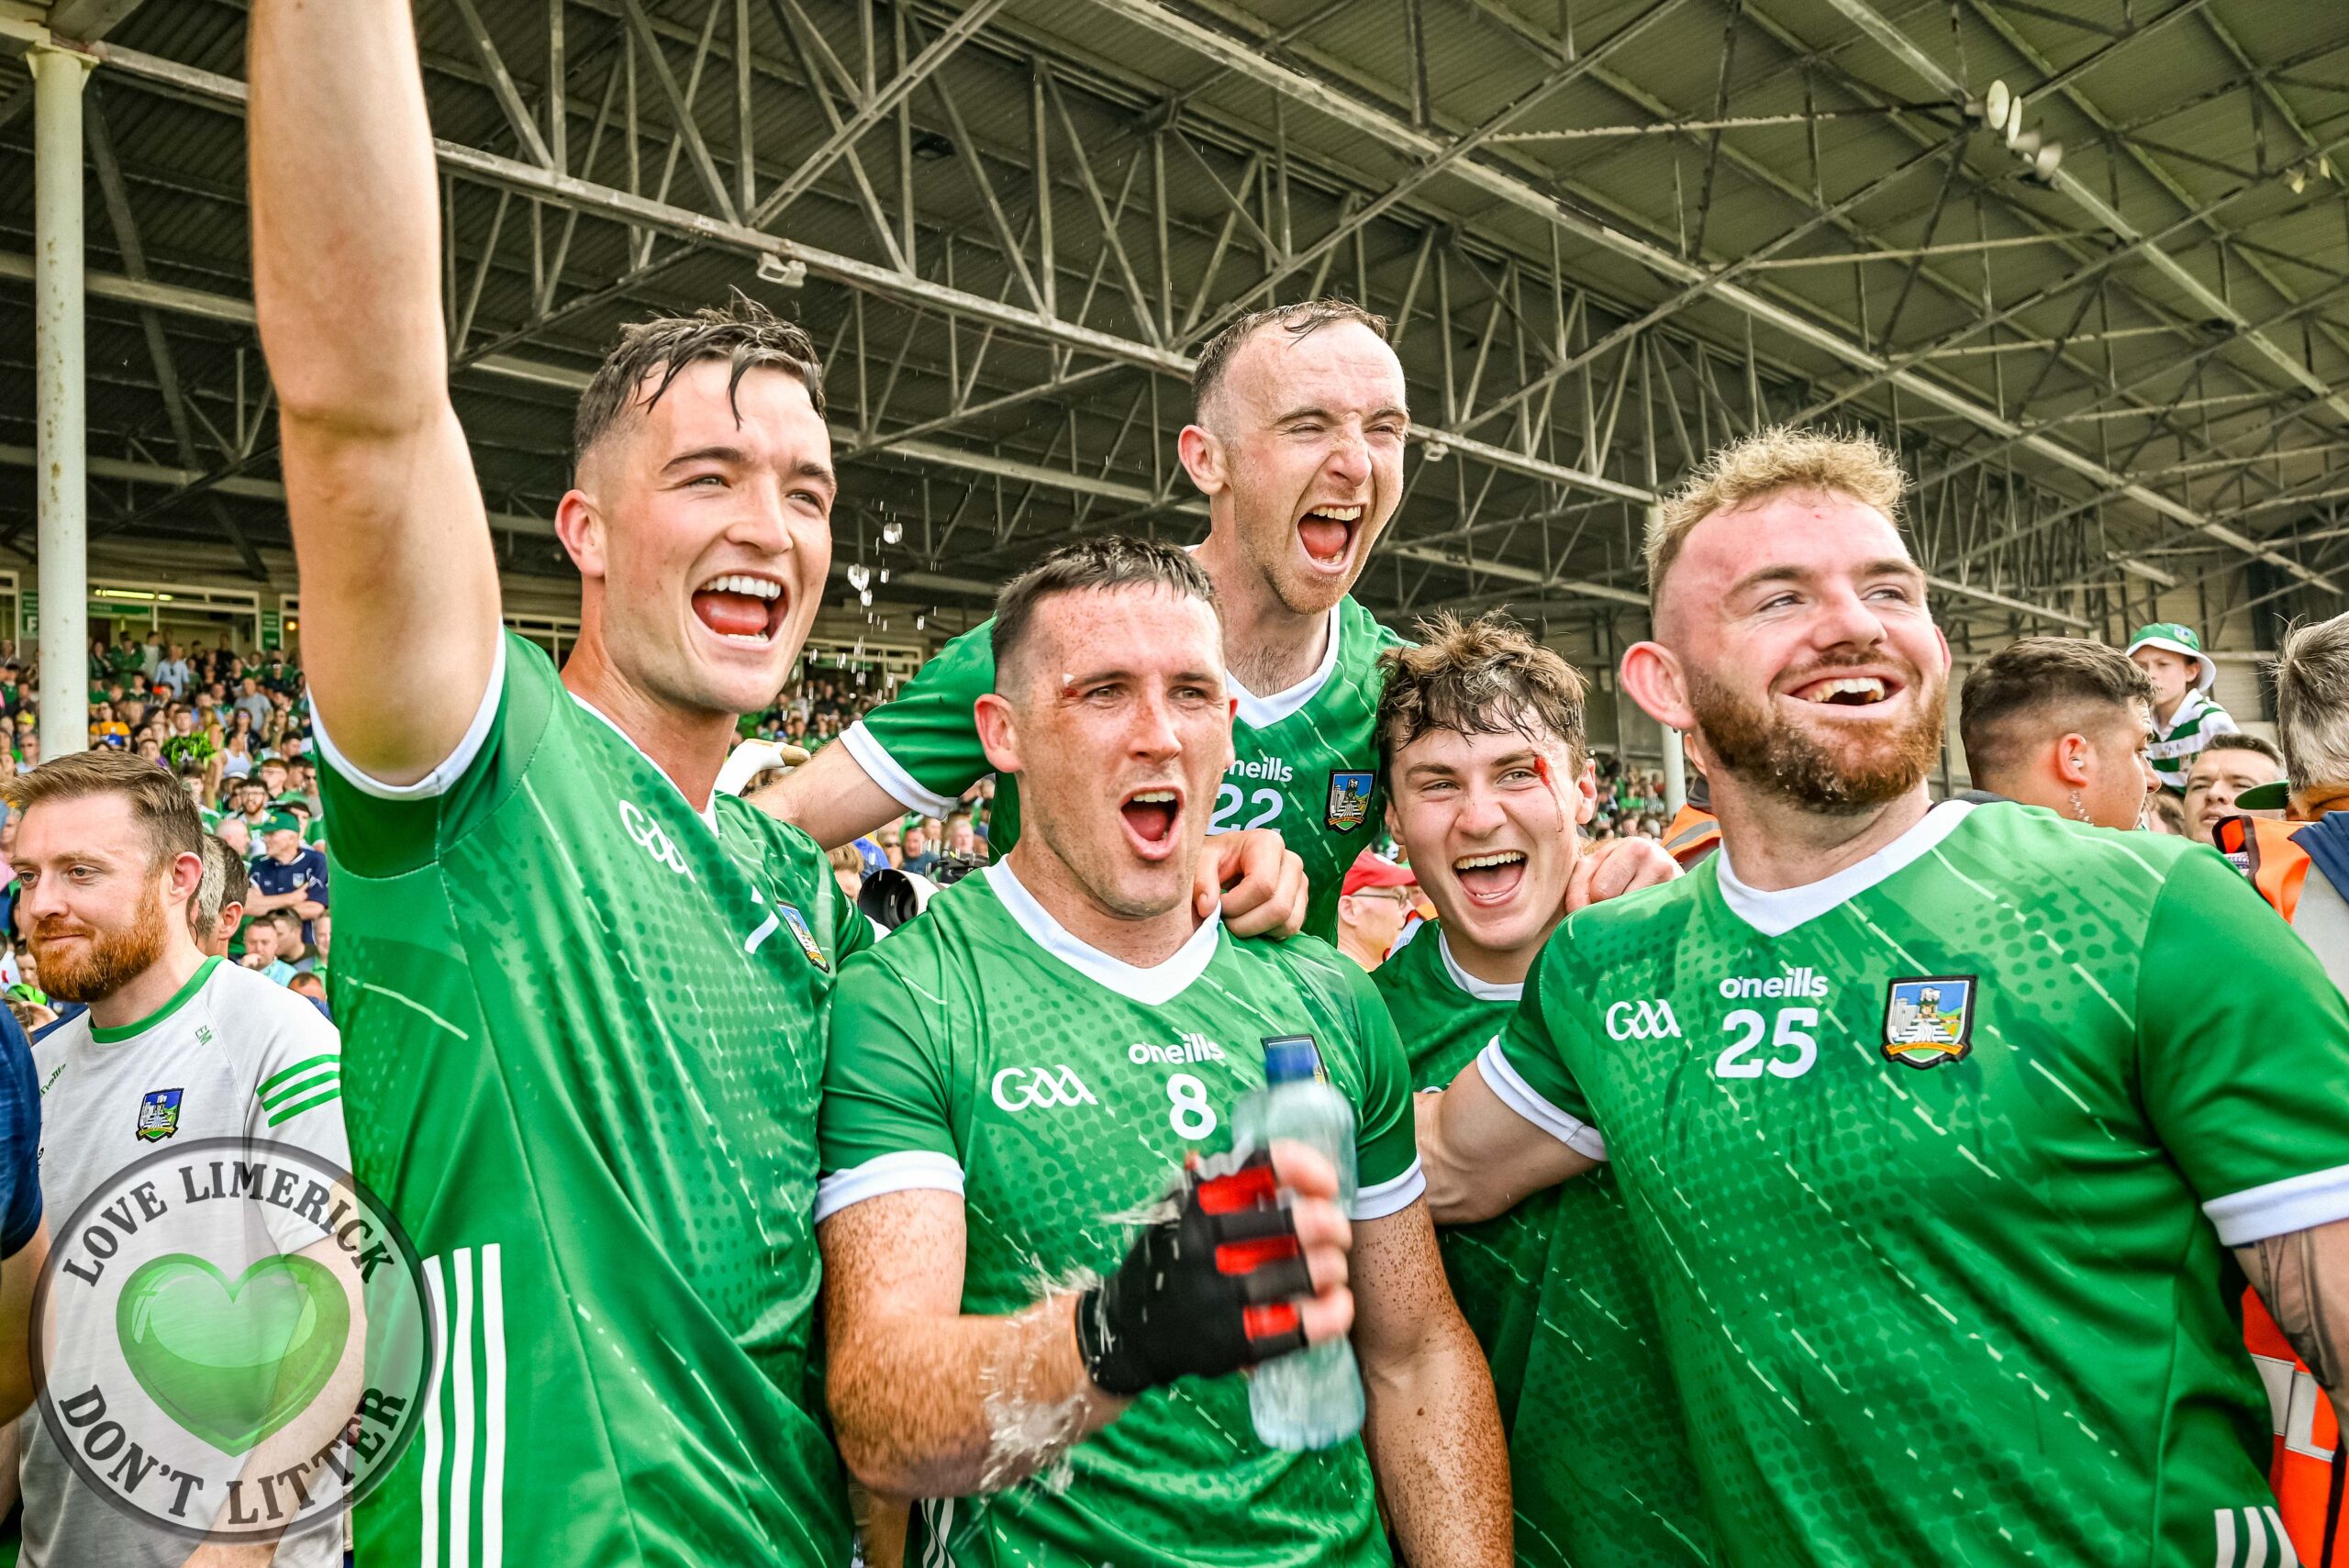 Limerick Senior Hurlers make it five-in-a-row Munster Championships, defeating Clare in front of a sold-out TUS Gaelic Grounds audience